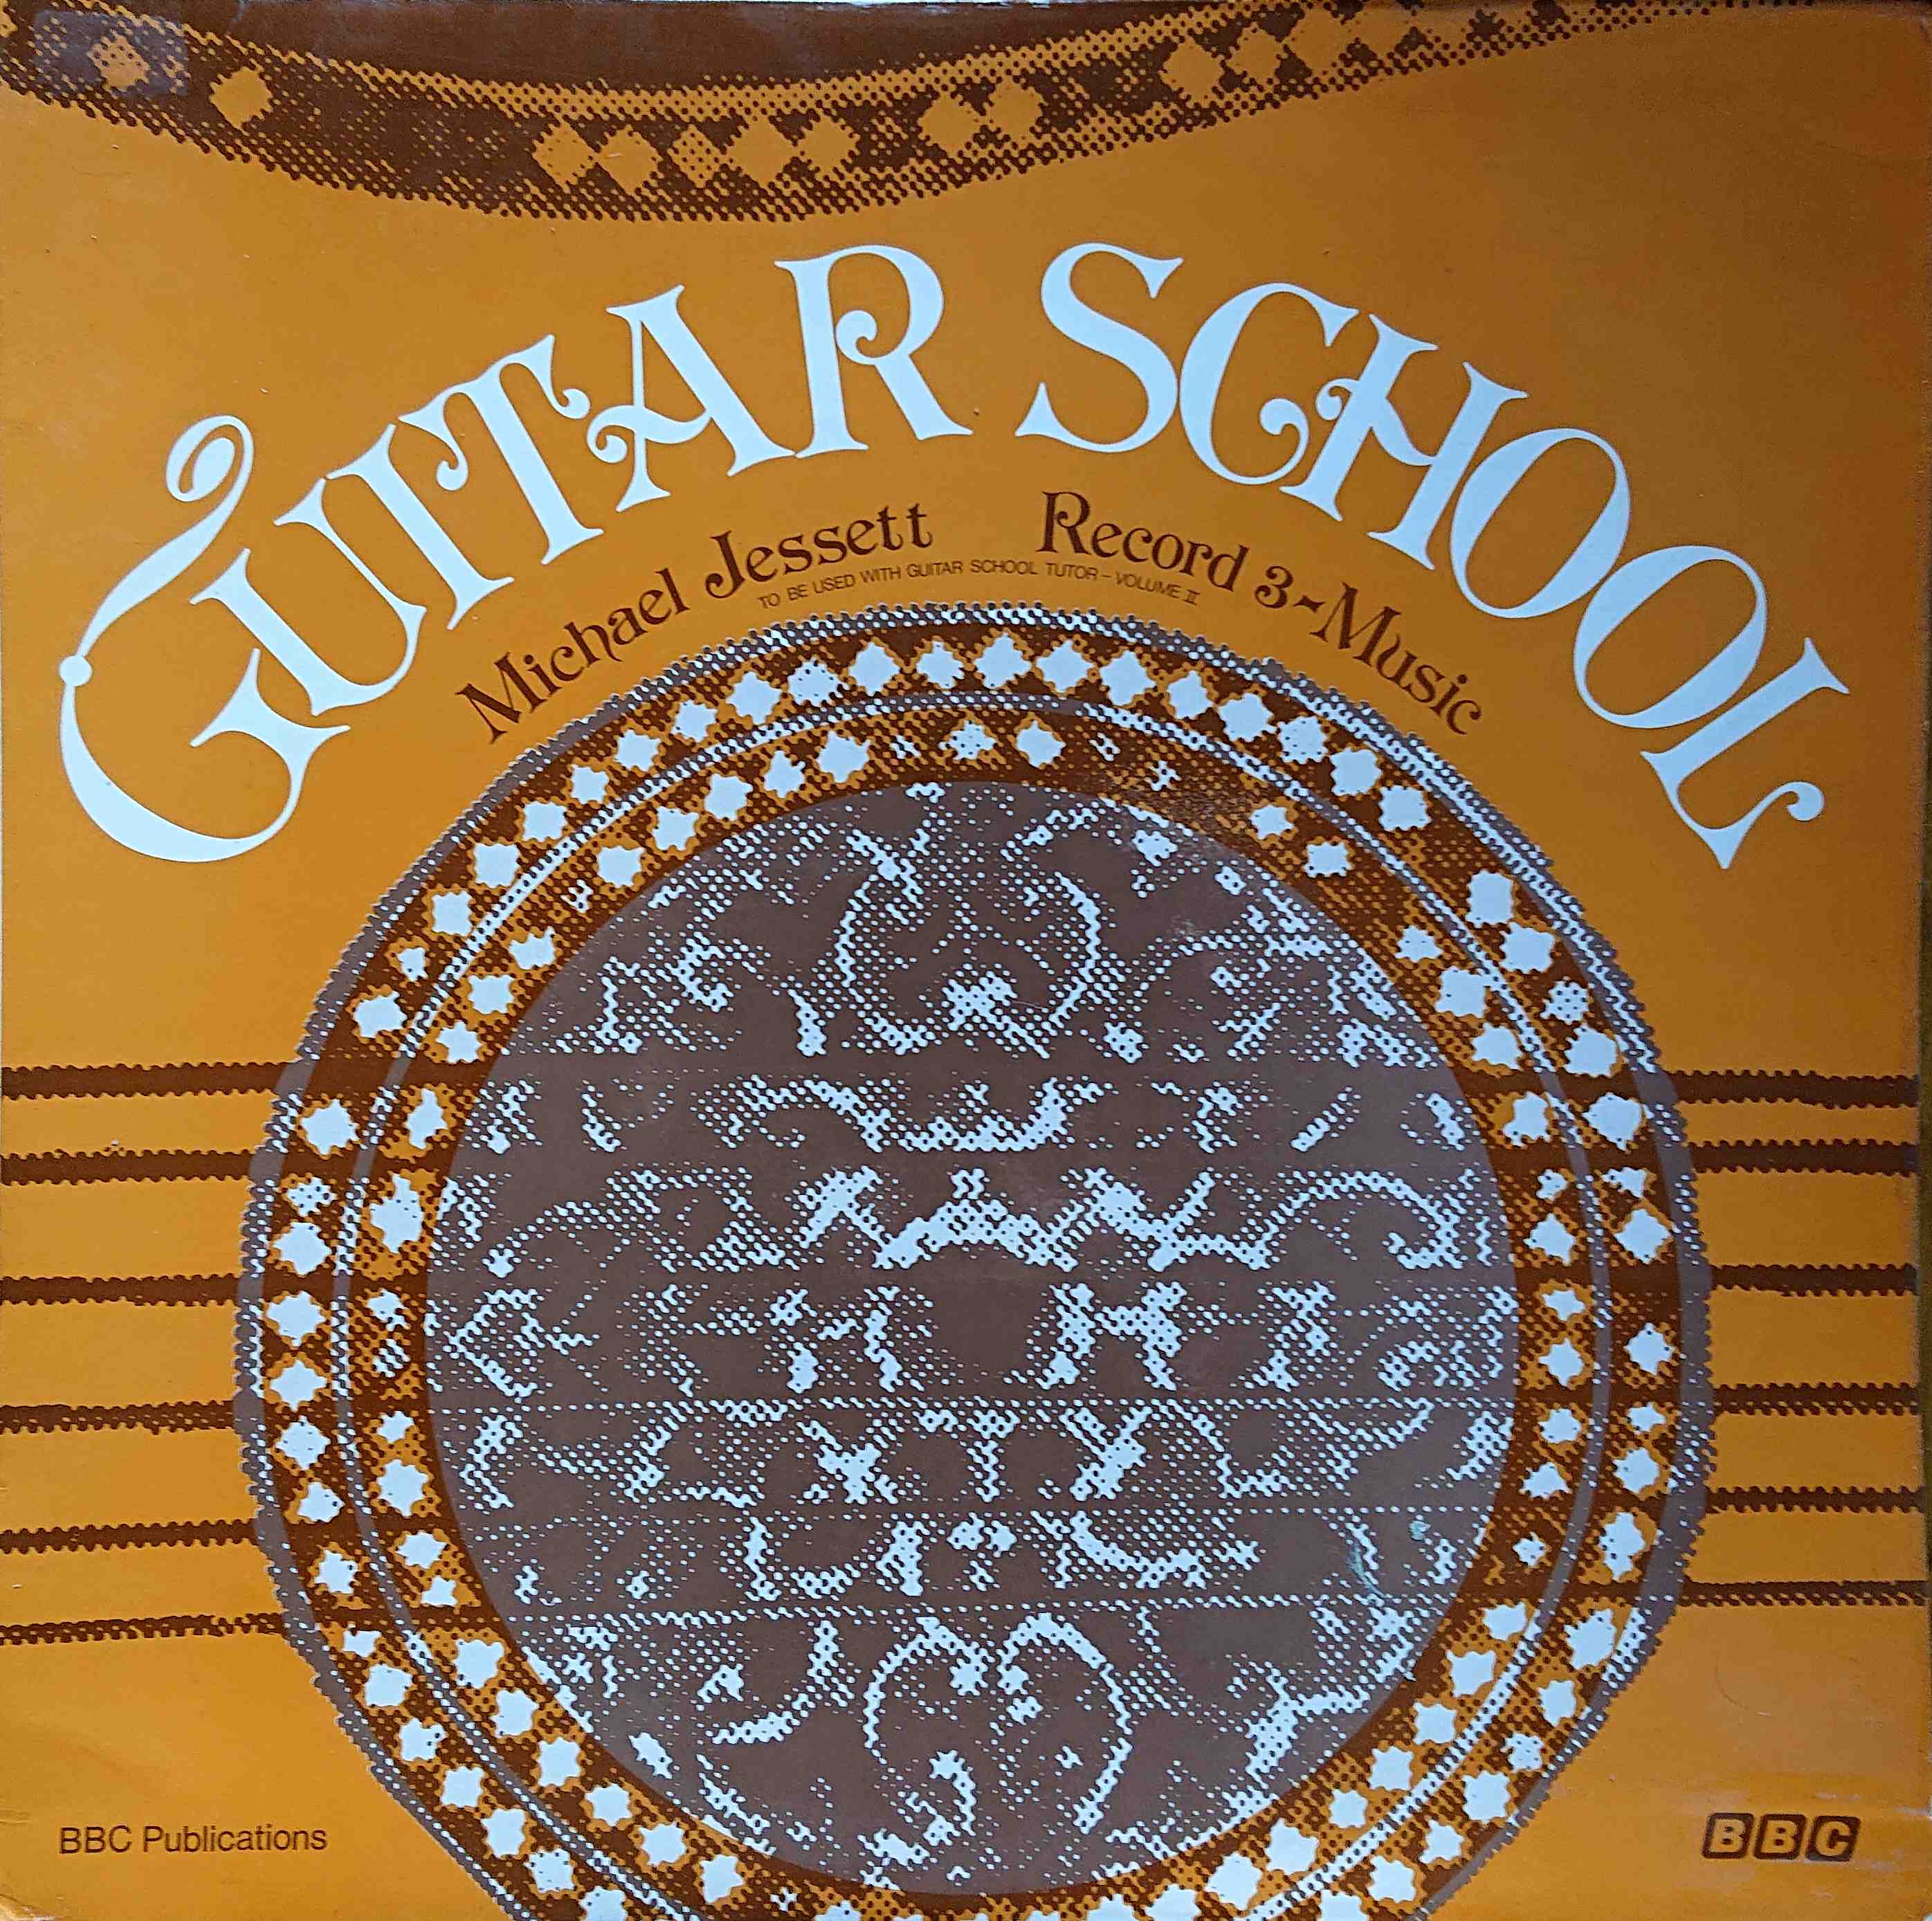 Picture of Guitar school - Record 3 - Music by artist Michael Jessett from the BBC albums - Records and Tapes library